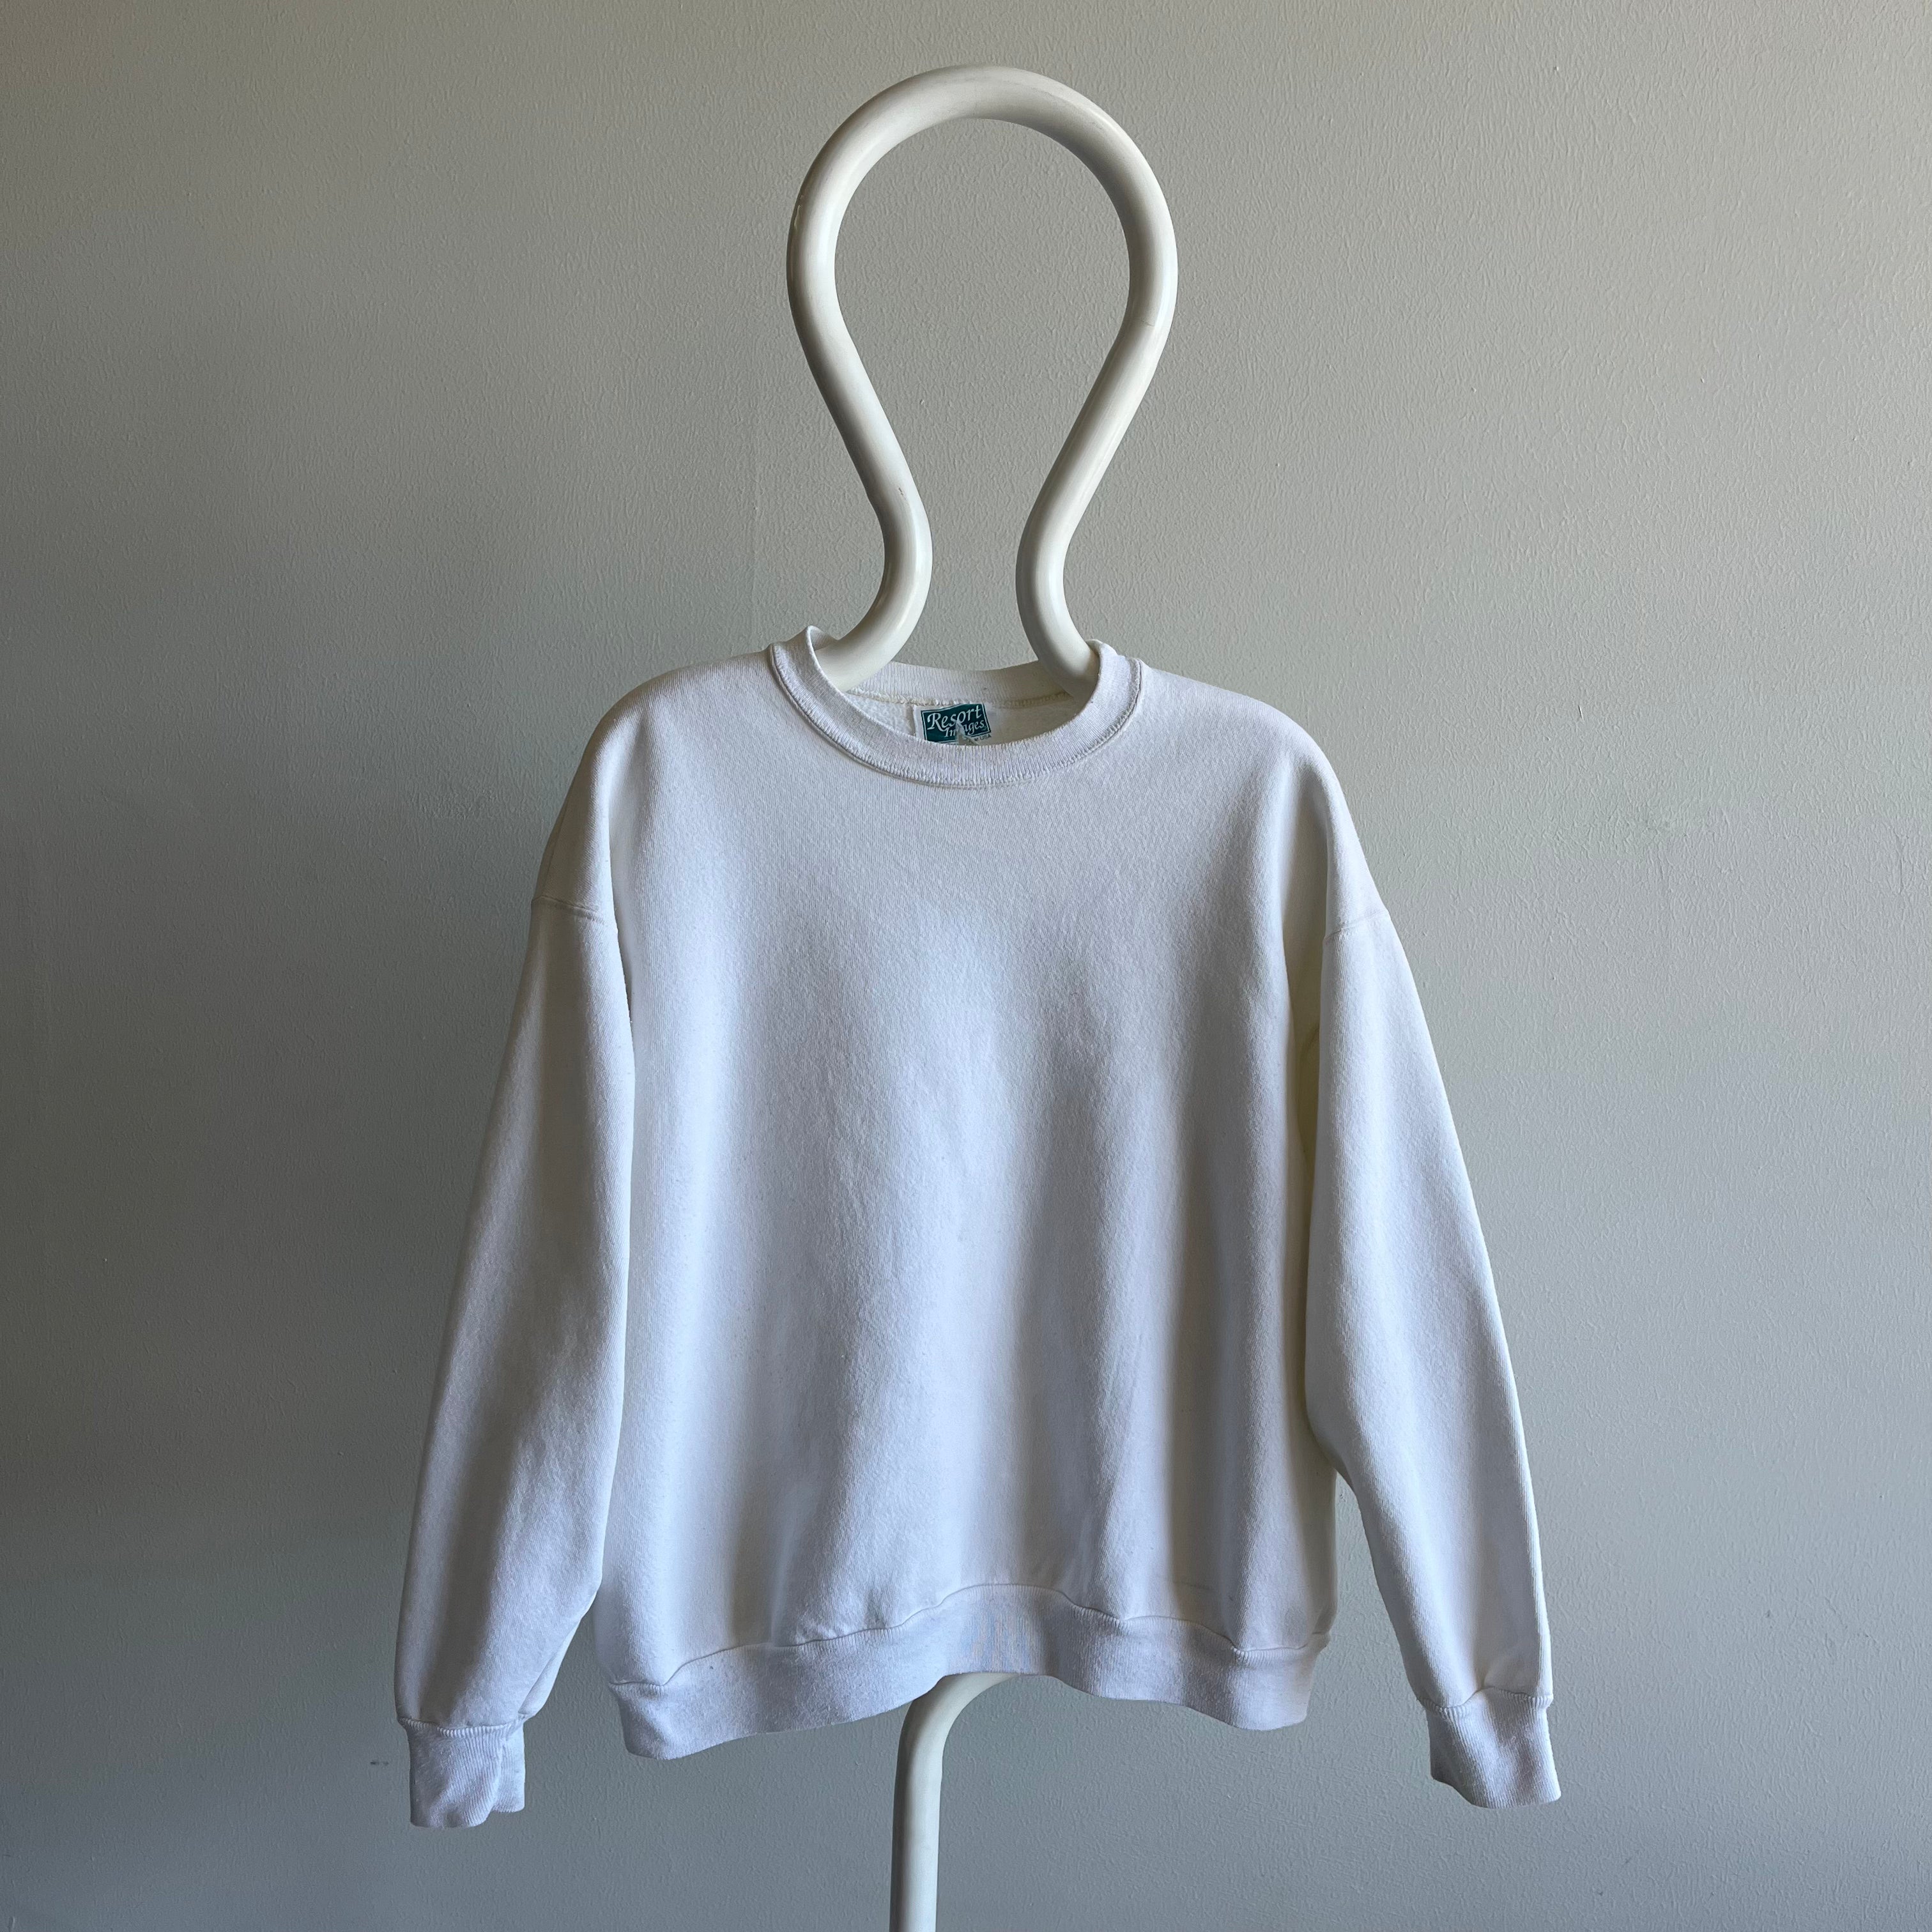 1990s Blank White Sweatshirt with Aging